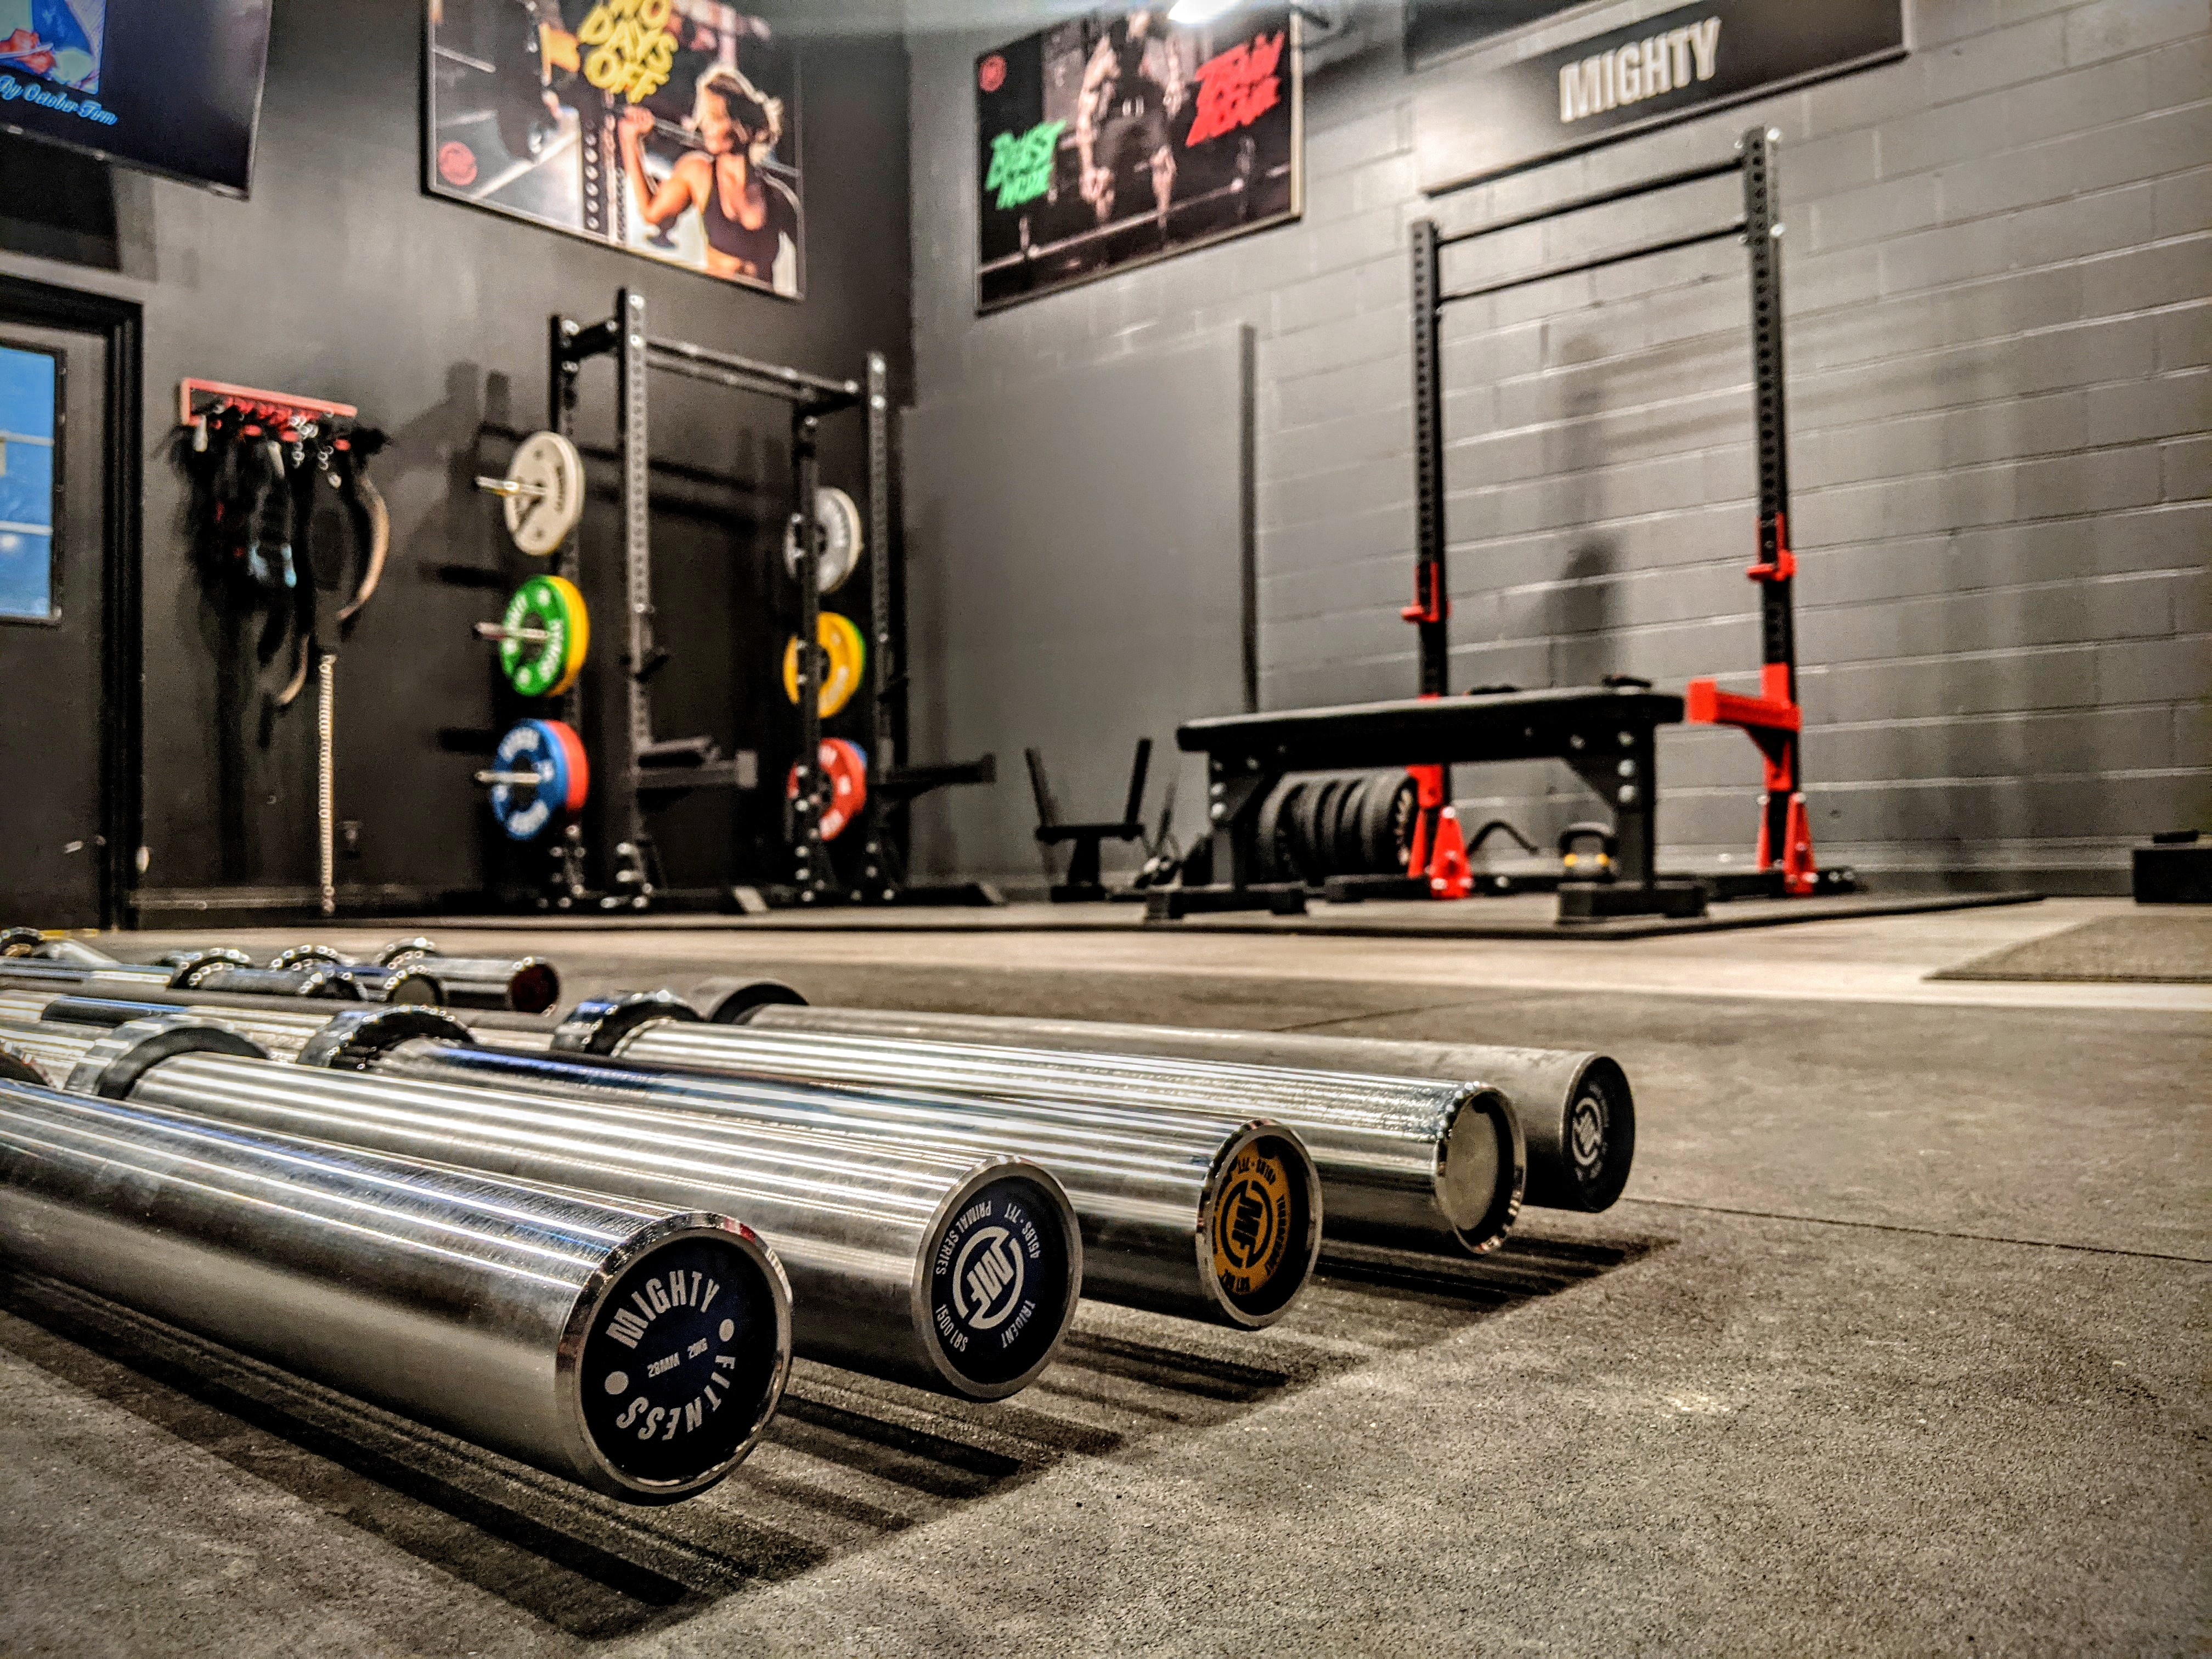 Olympic Barbells - Mighty Fitness